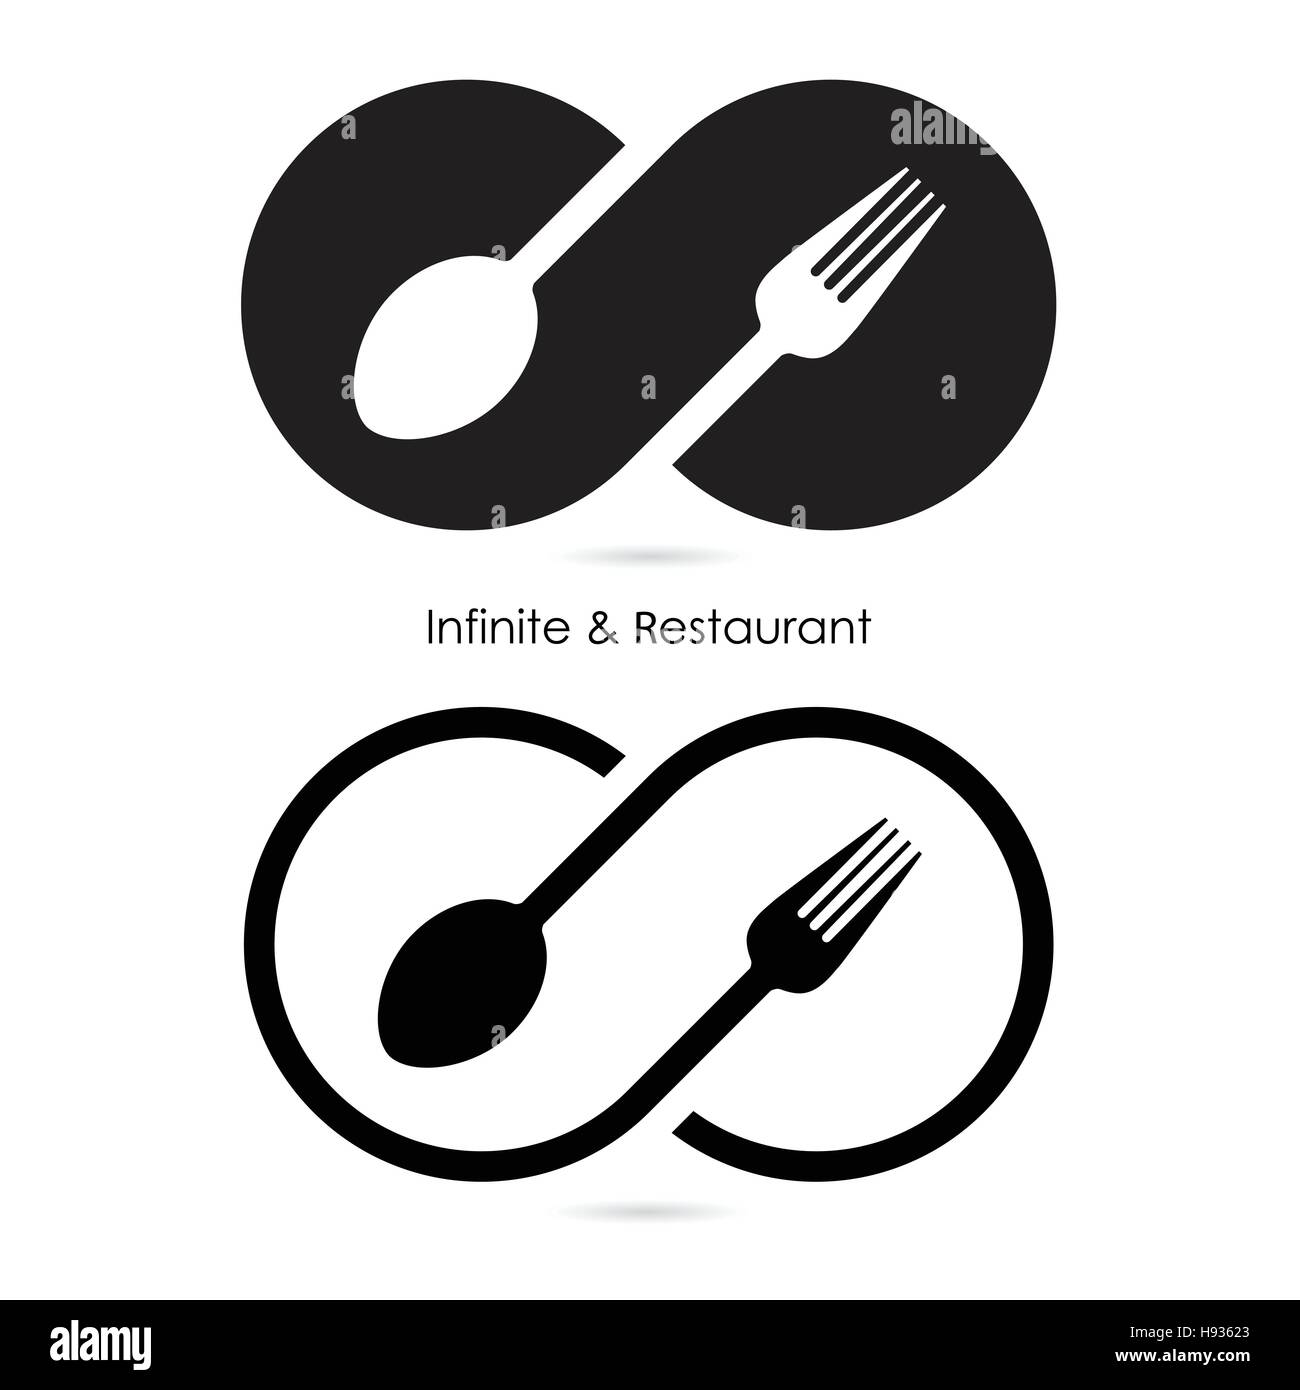 Infinity & restaurant icon.Food & infinity icon.Fork & spoon icon.Business or food and drink concept.Vector illustration Stock Vector